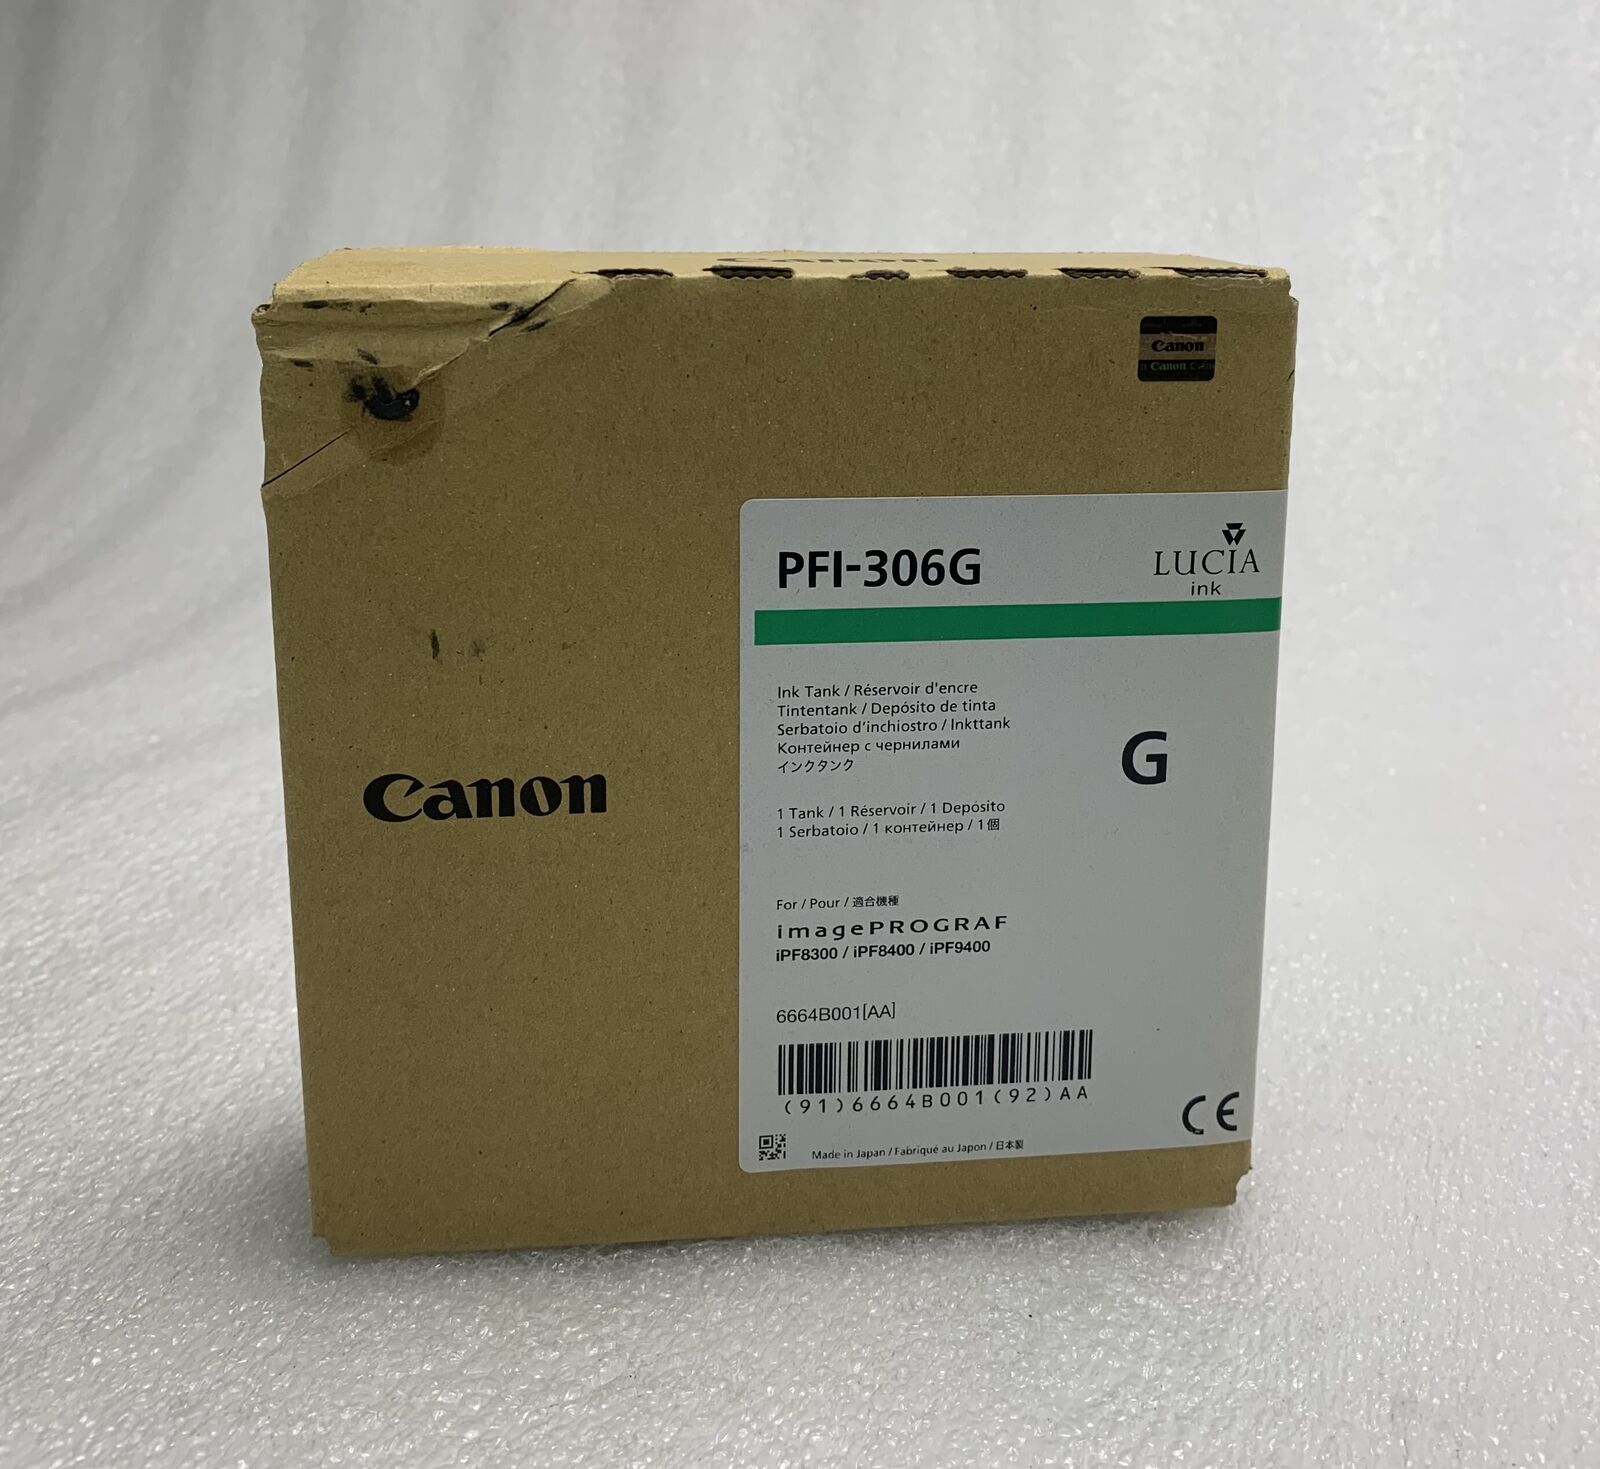 Canon PFI-306G Pigment Green Ink Cartridge Sealed Expired 07-2015/10-2019 Sealed